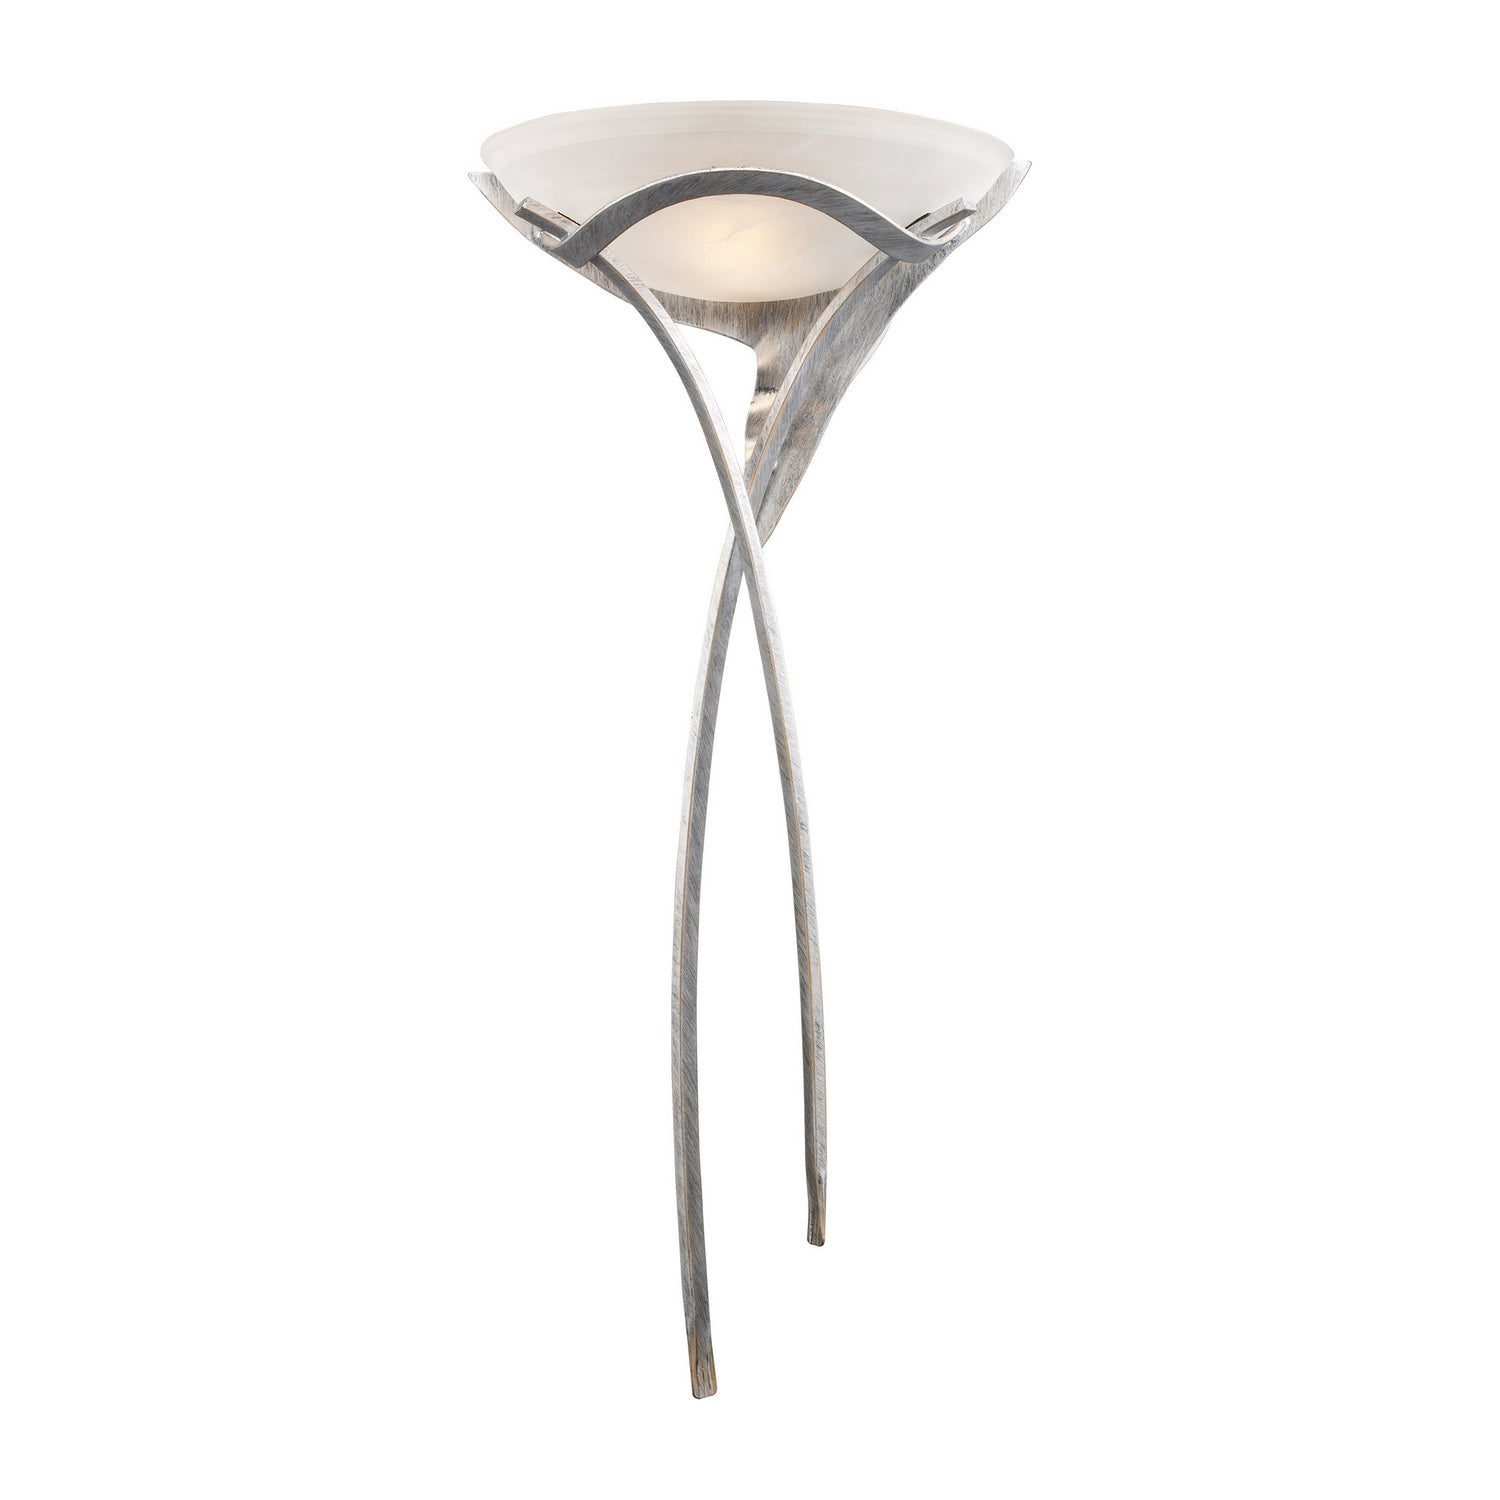 ELK Home - 002-TS - One Light Wall Sconce - Aurora - Tarnished Silver